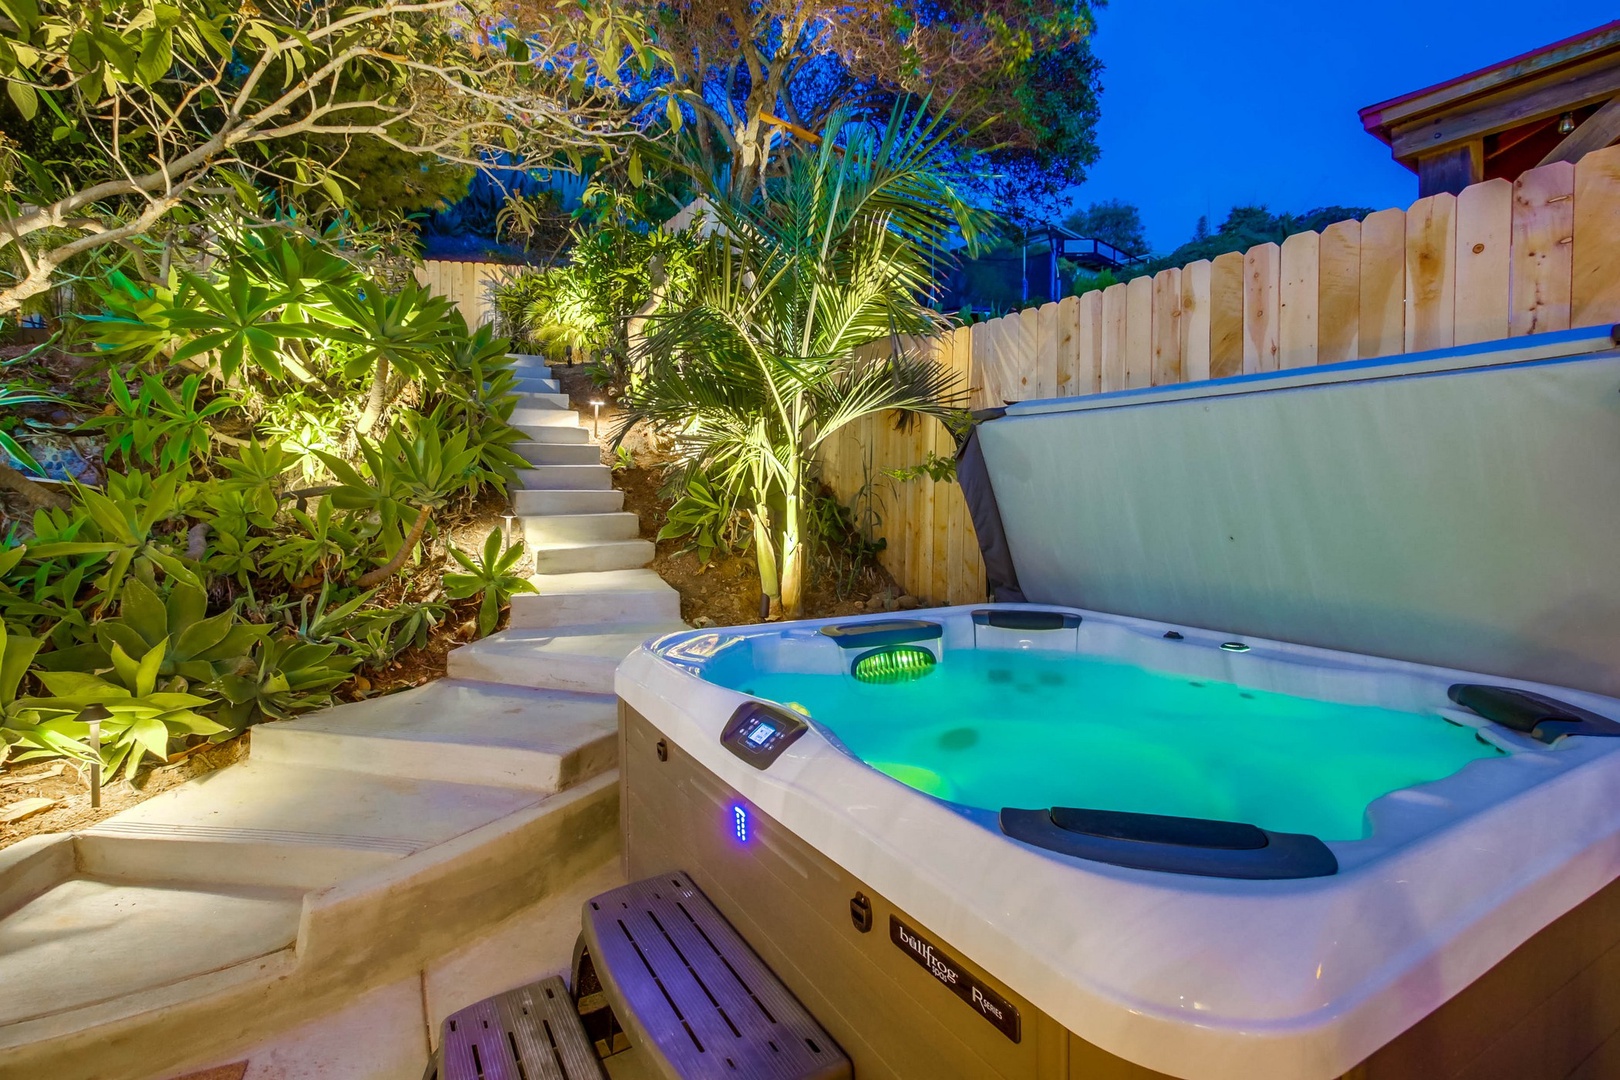 6-person hot tub and stairs to terrace